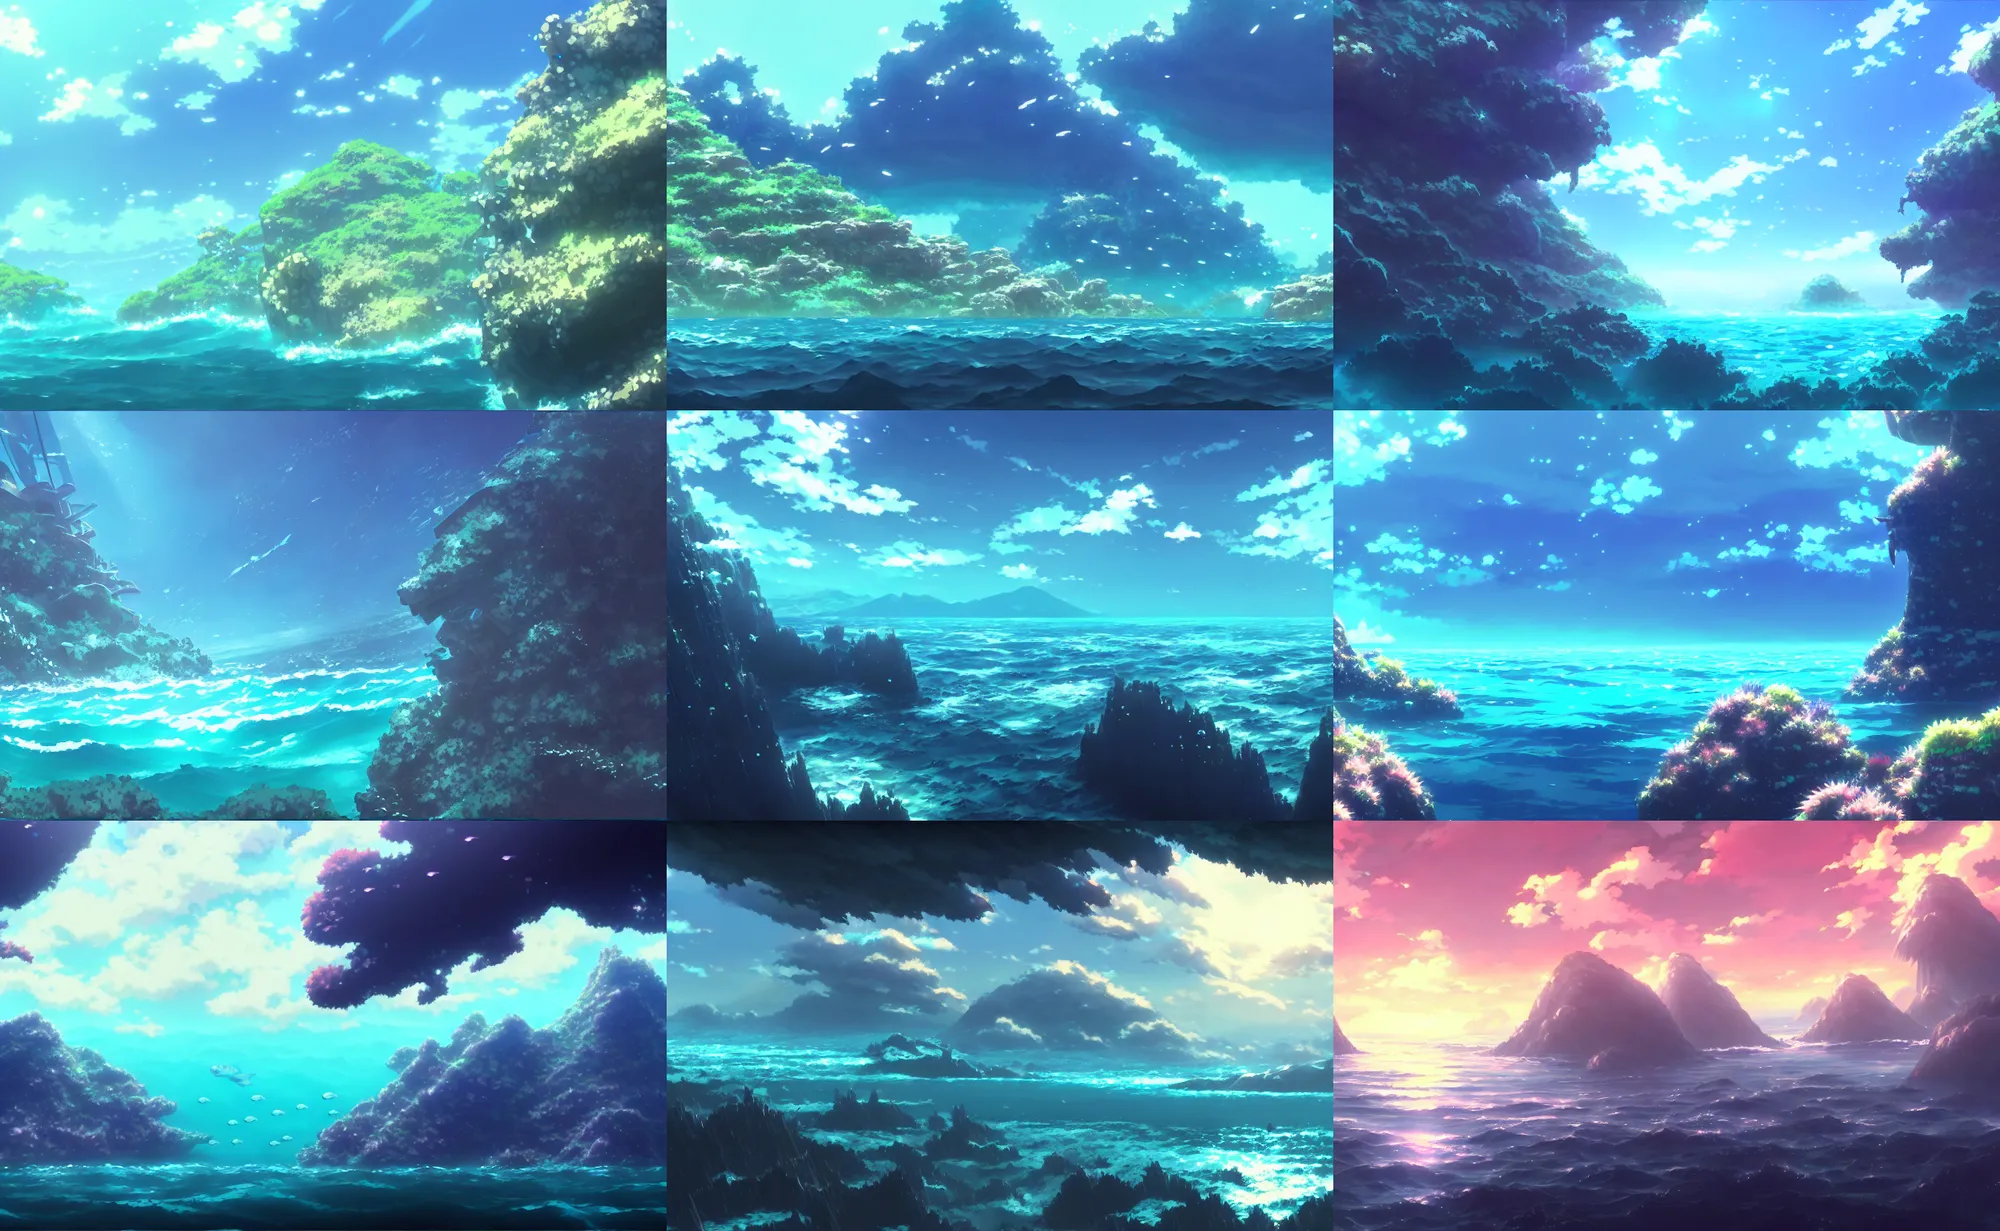 In front of the ocean - Anime style Background by TamagochiKun on DeviantArt